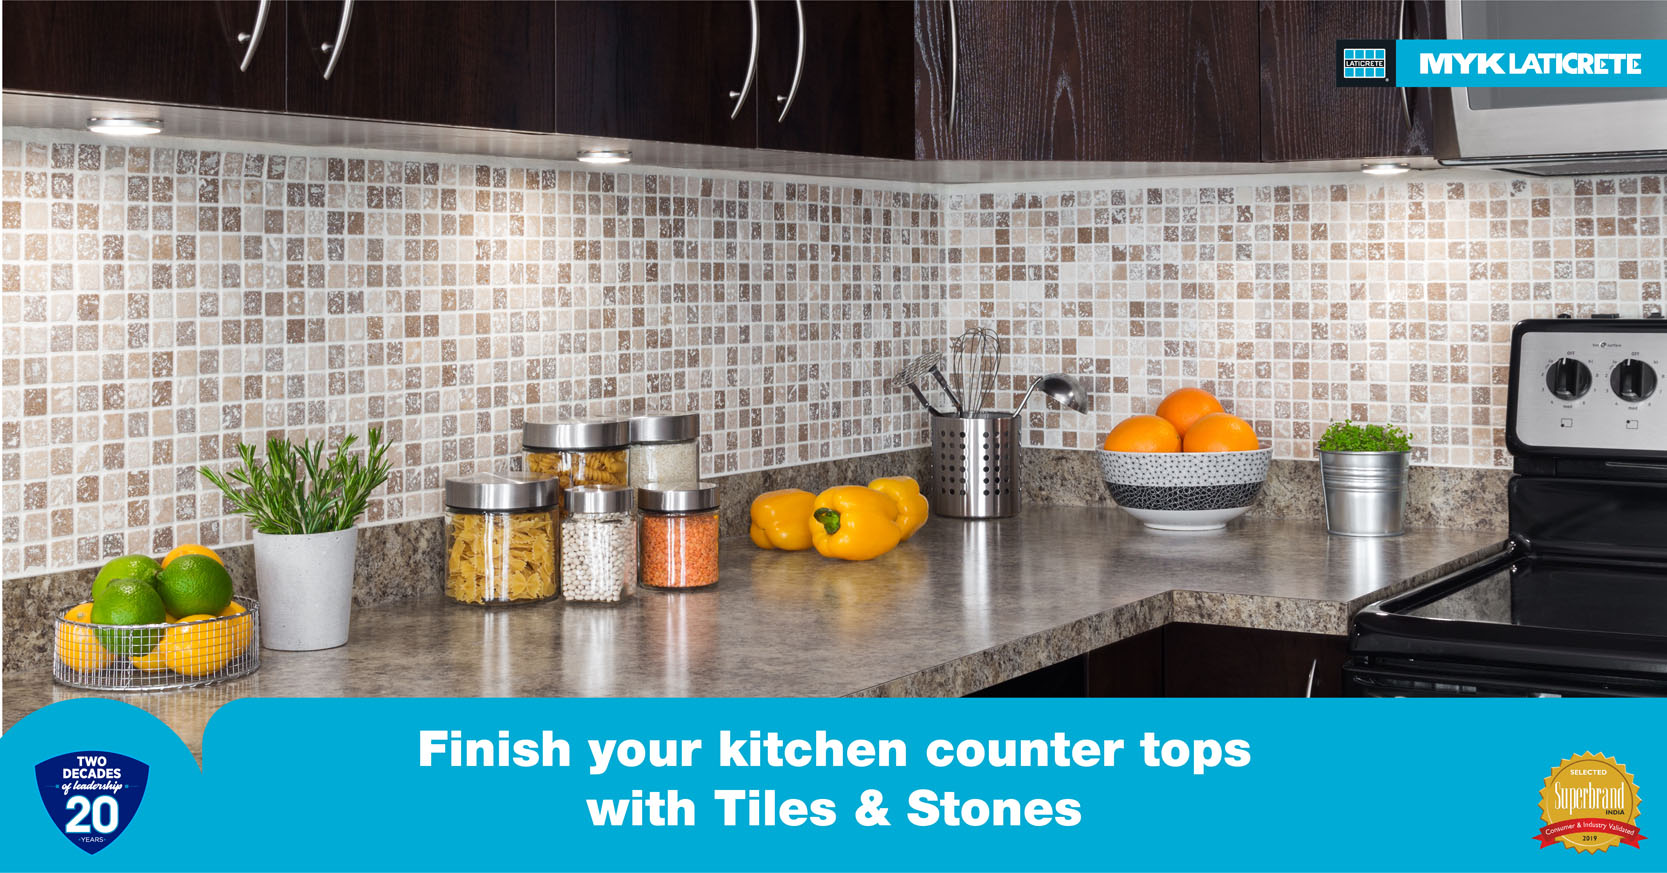 Tiling on Kitchen Countertops - MYK LATICRETE Products